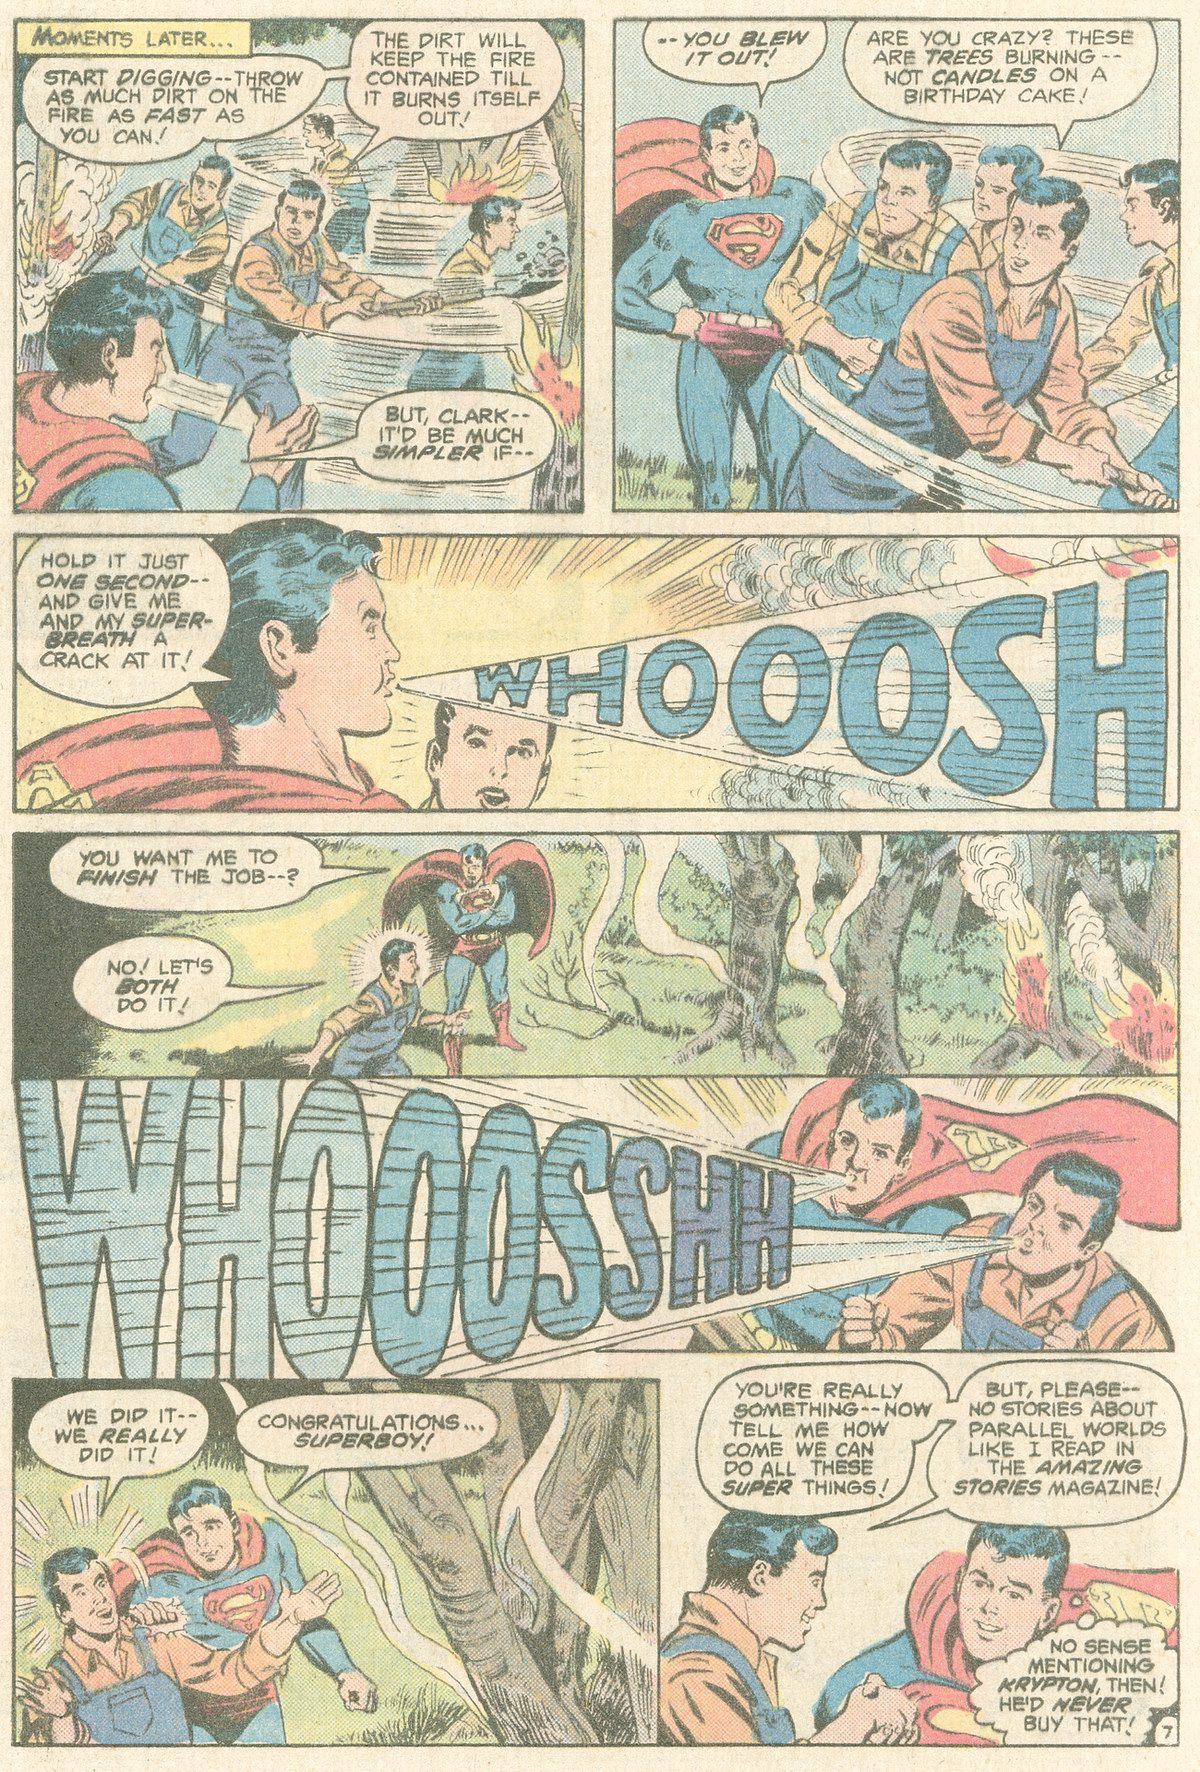 The New Adventures of Superboy 15 Page 24